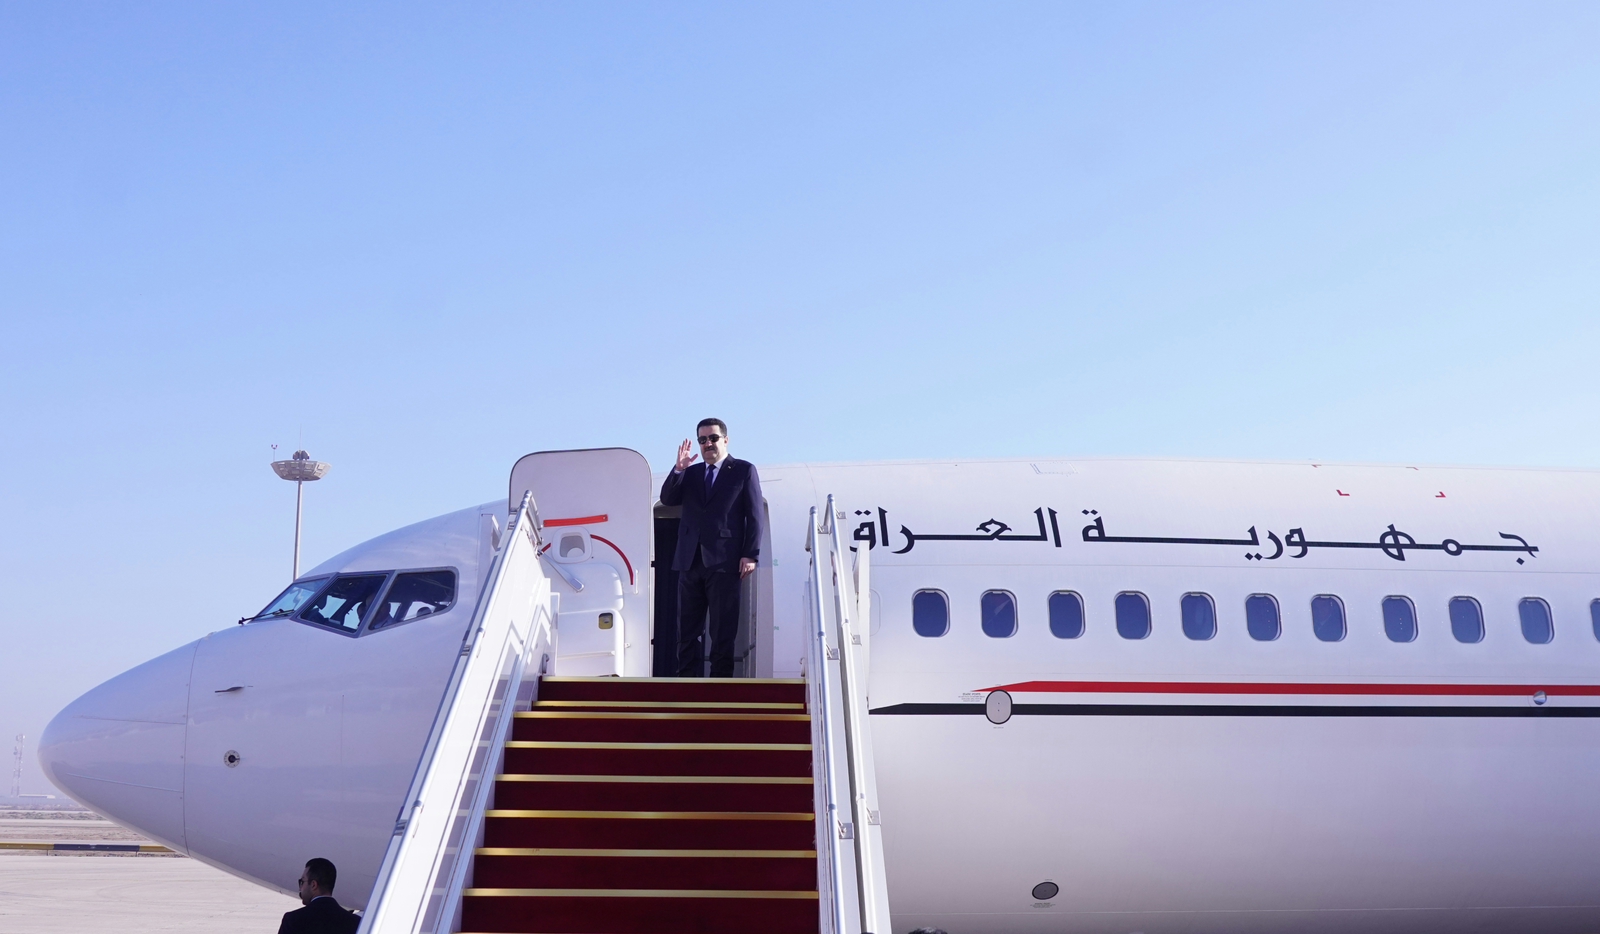 Iraqi PM embarks on official visit to Washington, D.C., first since assuming office